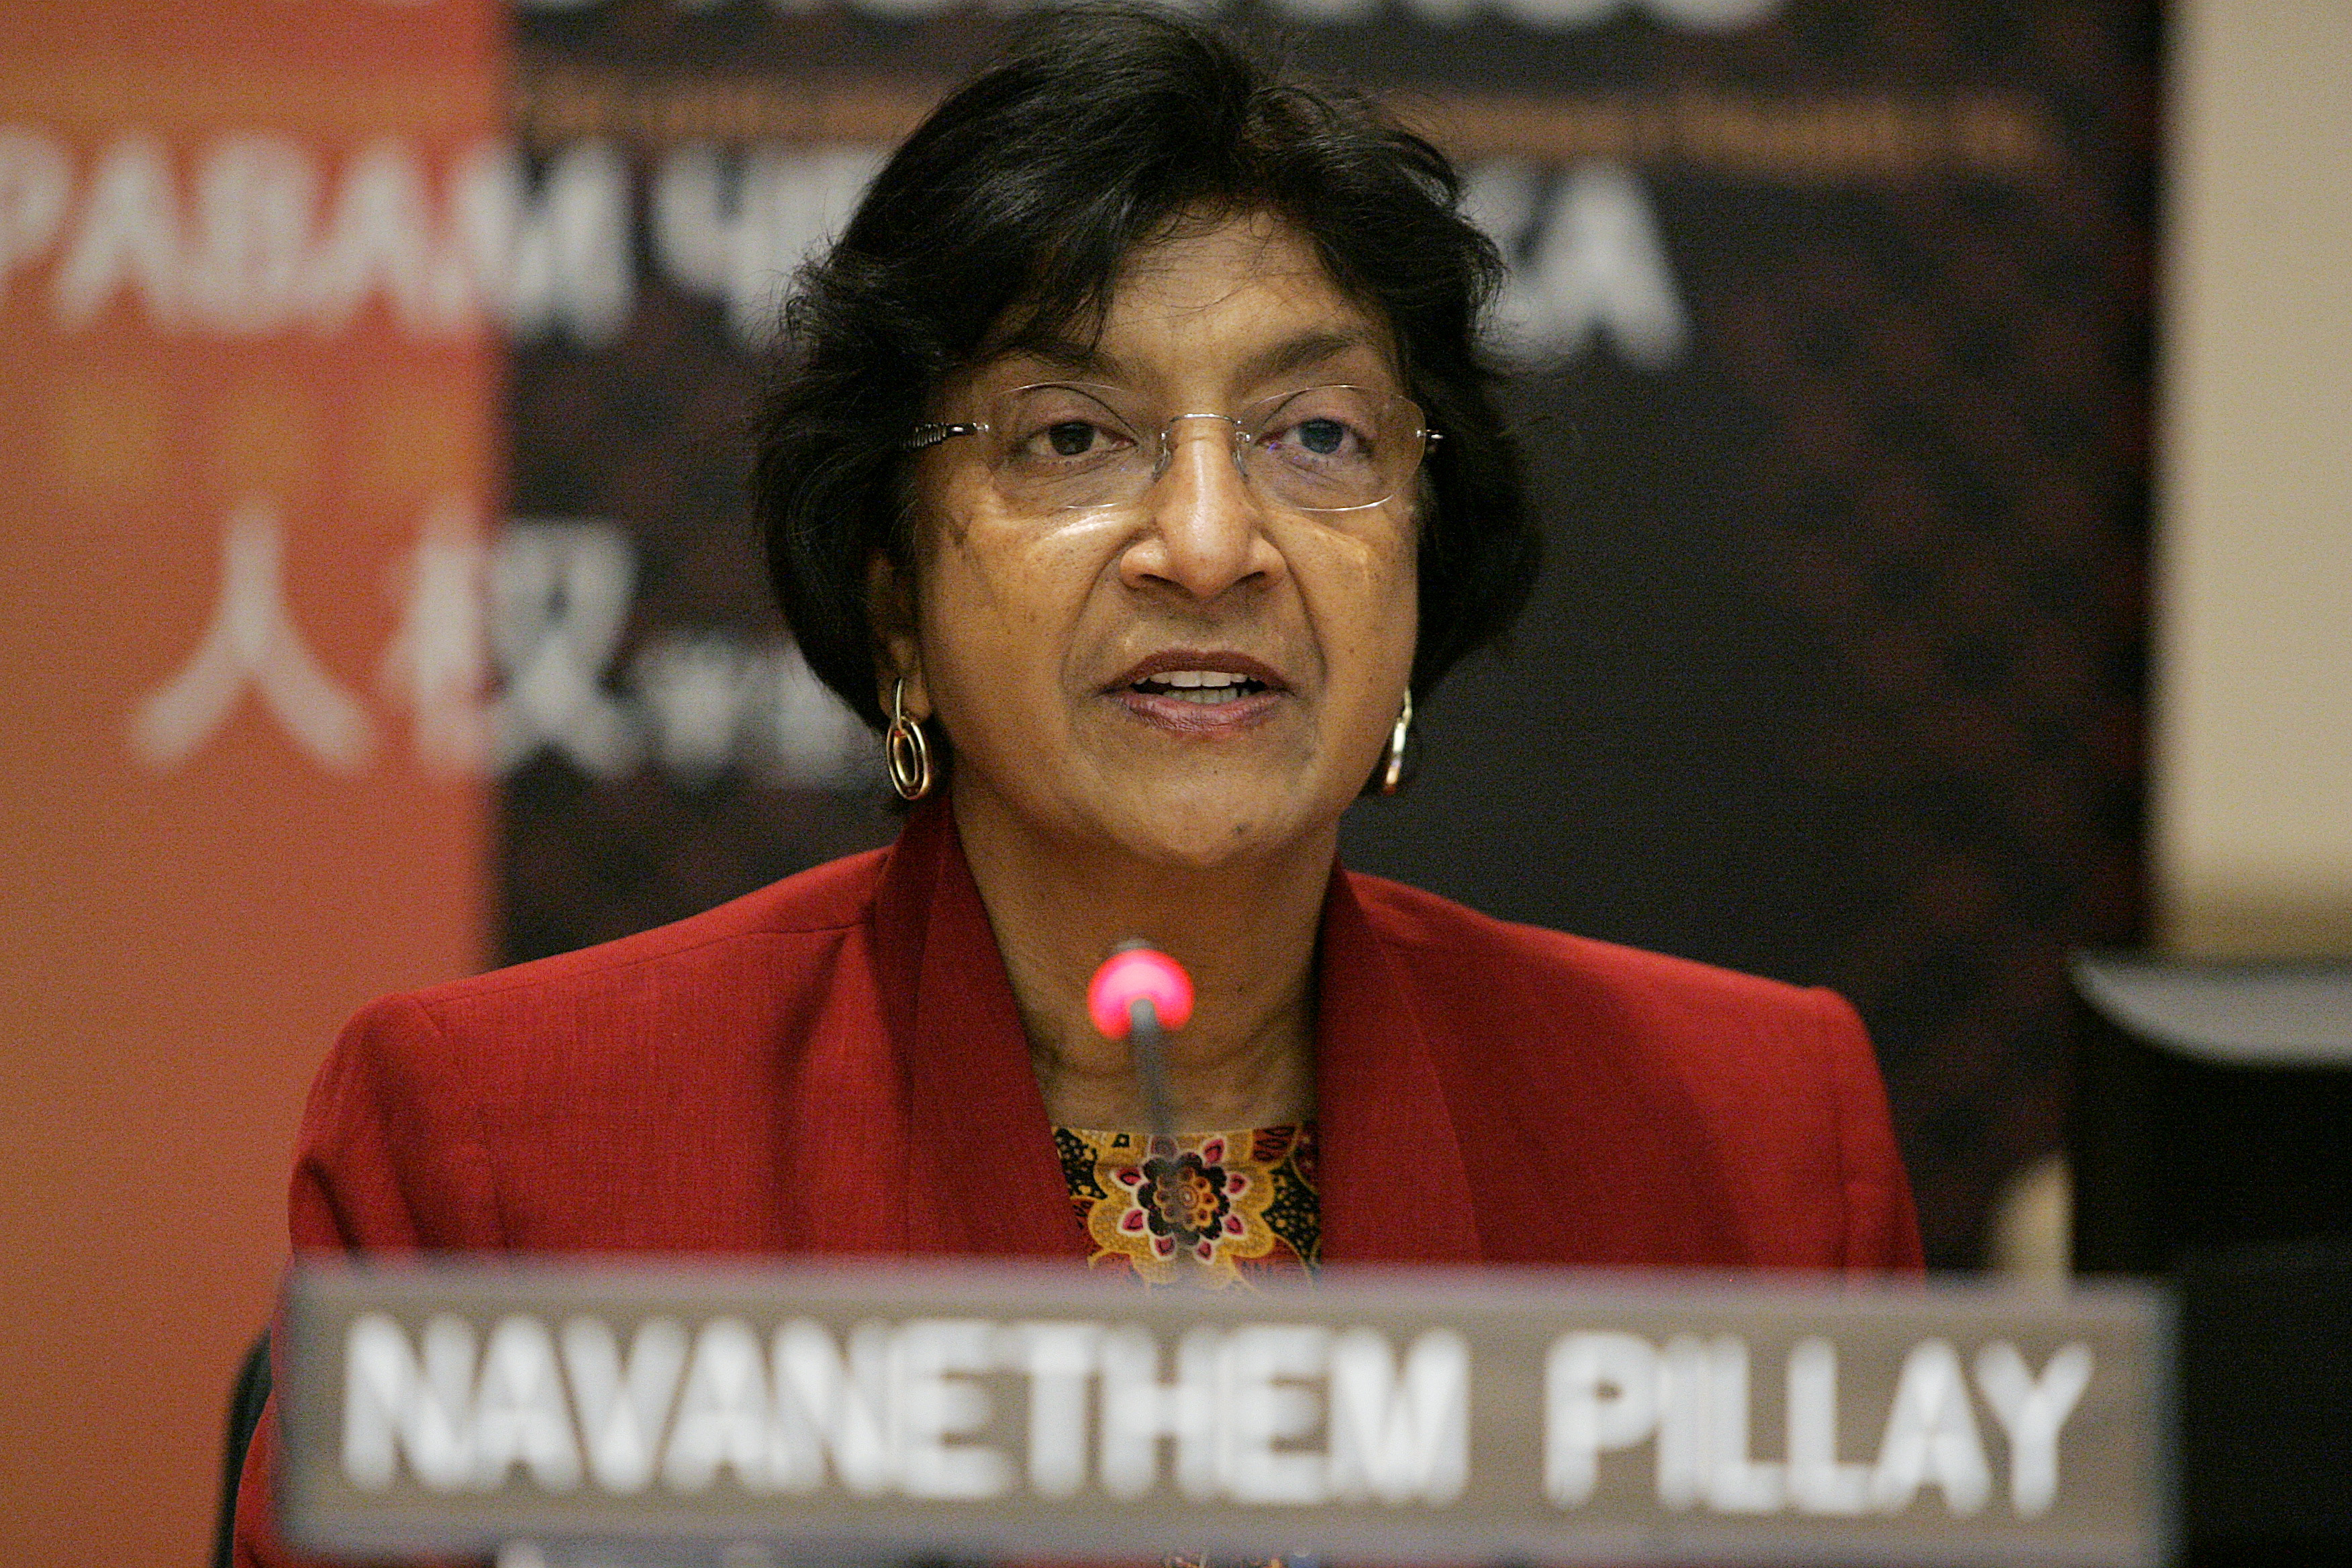 It was under Navanethem Pillay, who was the United Nations High Commissioner for Human Rights from 2008 to September 2014, that all of the existing four UN Commissions of Inquiry were created. The world has the former High Commissioner to thank for such valuable efforts in defense of human rights.